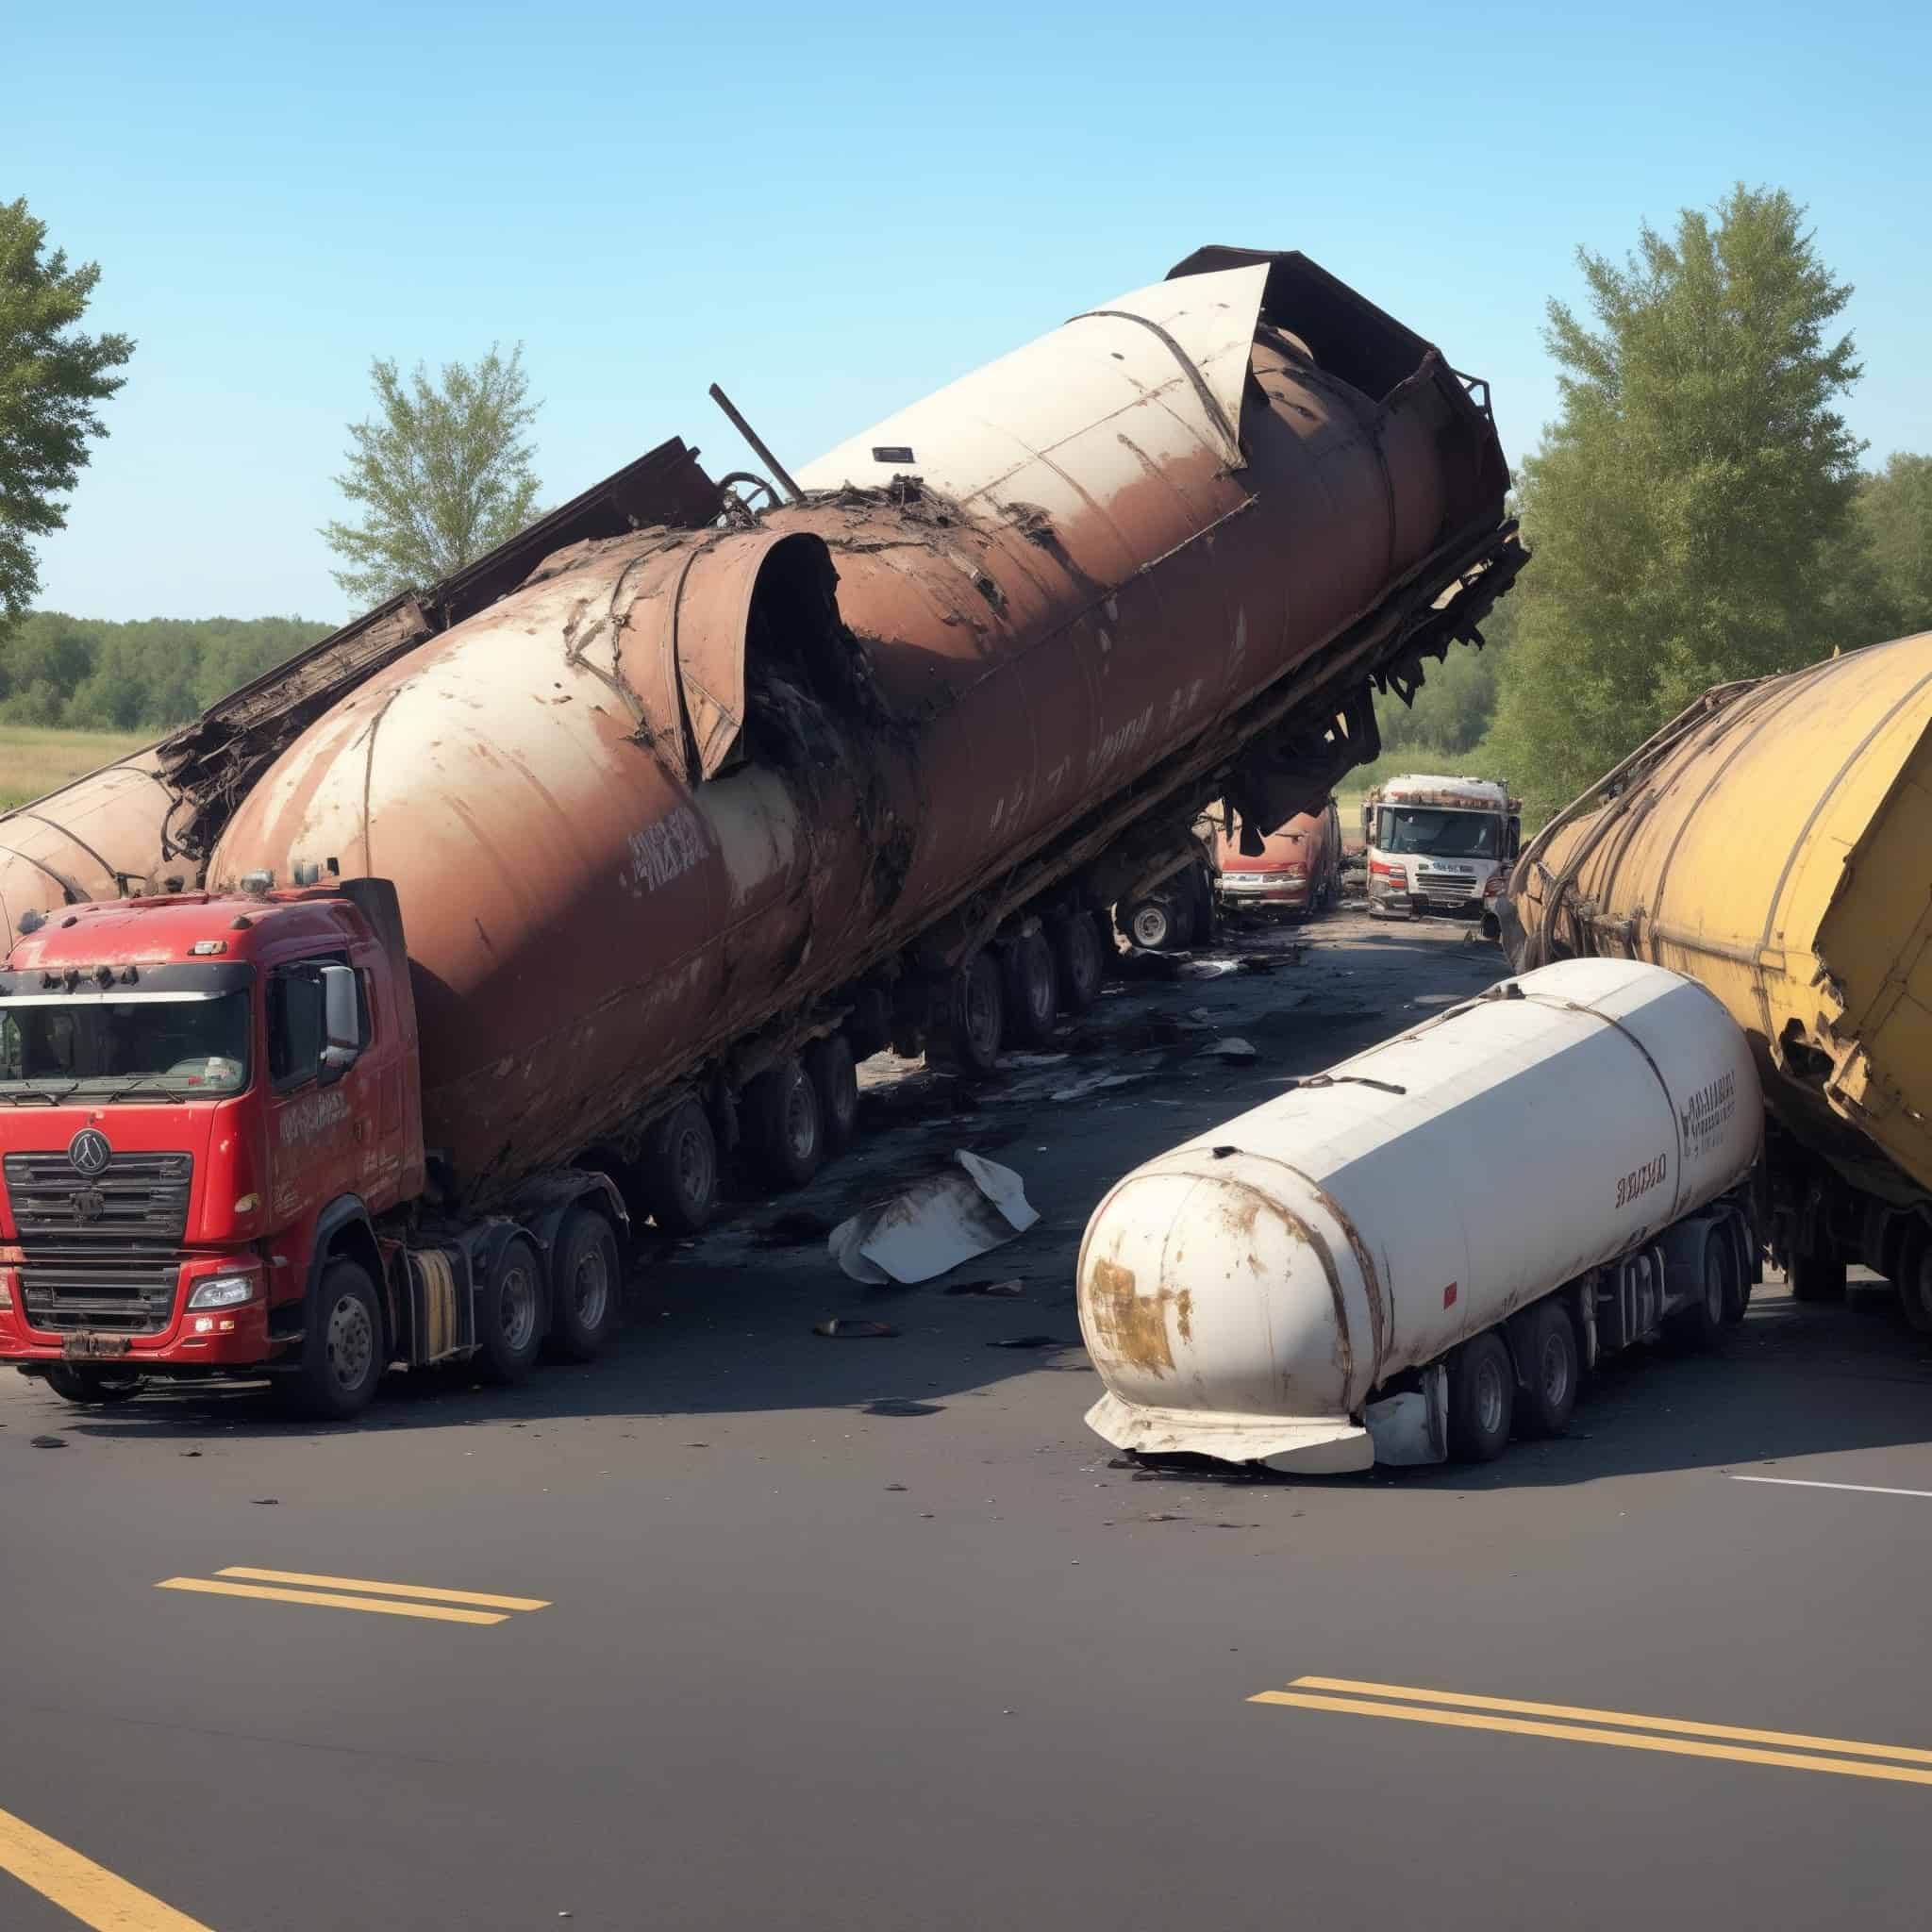 How to Handle Tanker Truck Accidents?